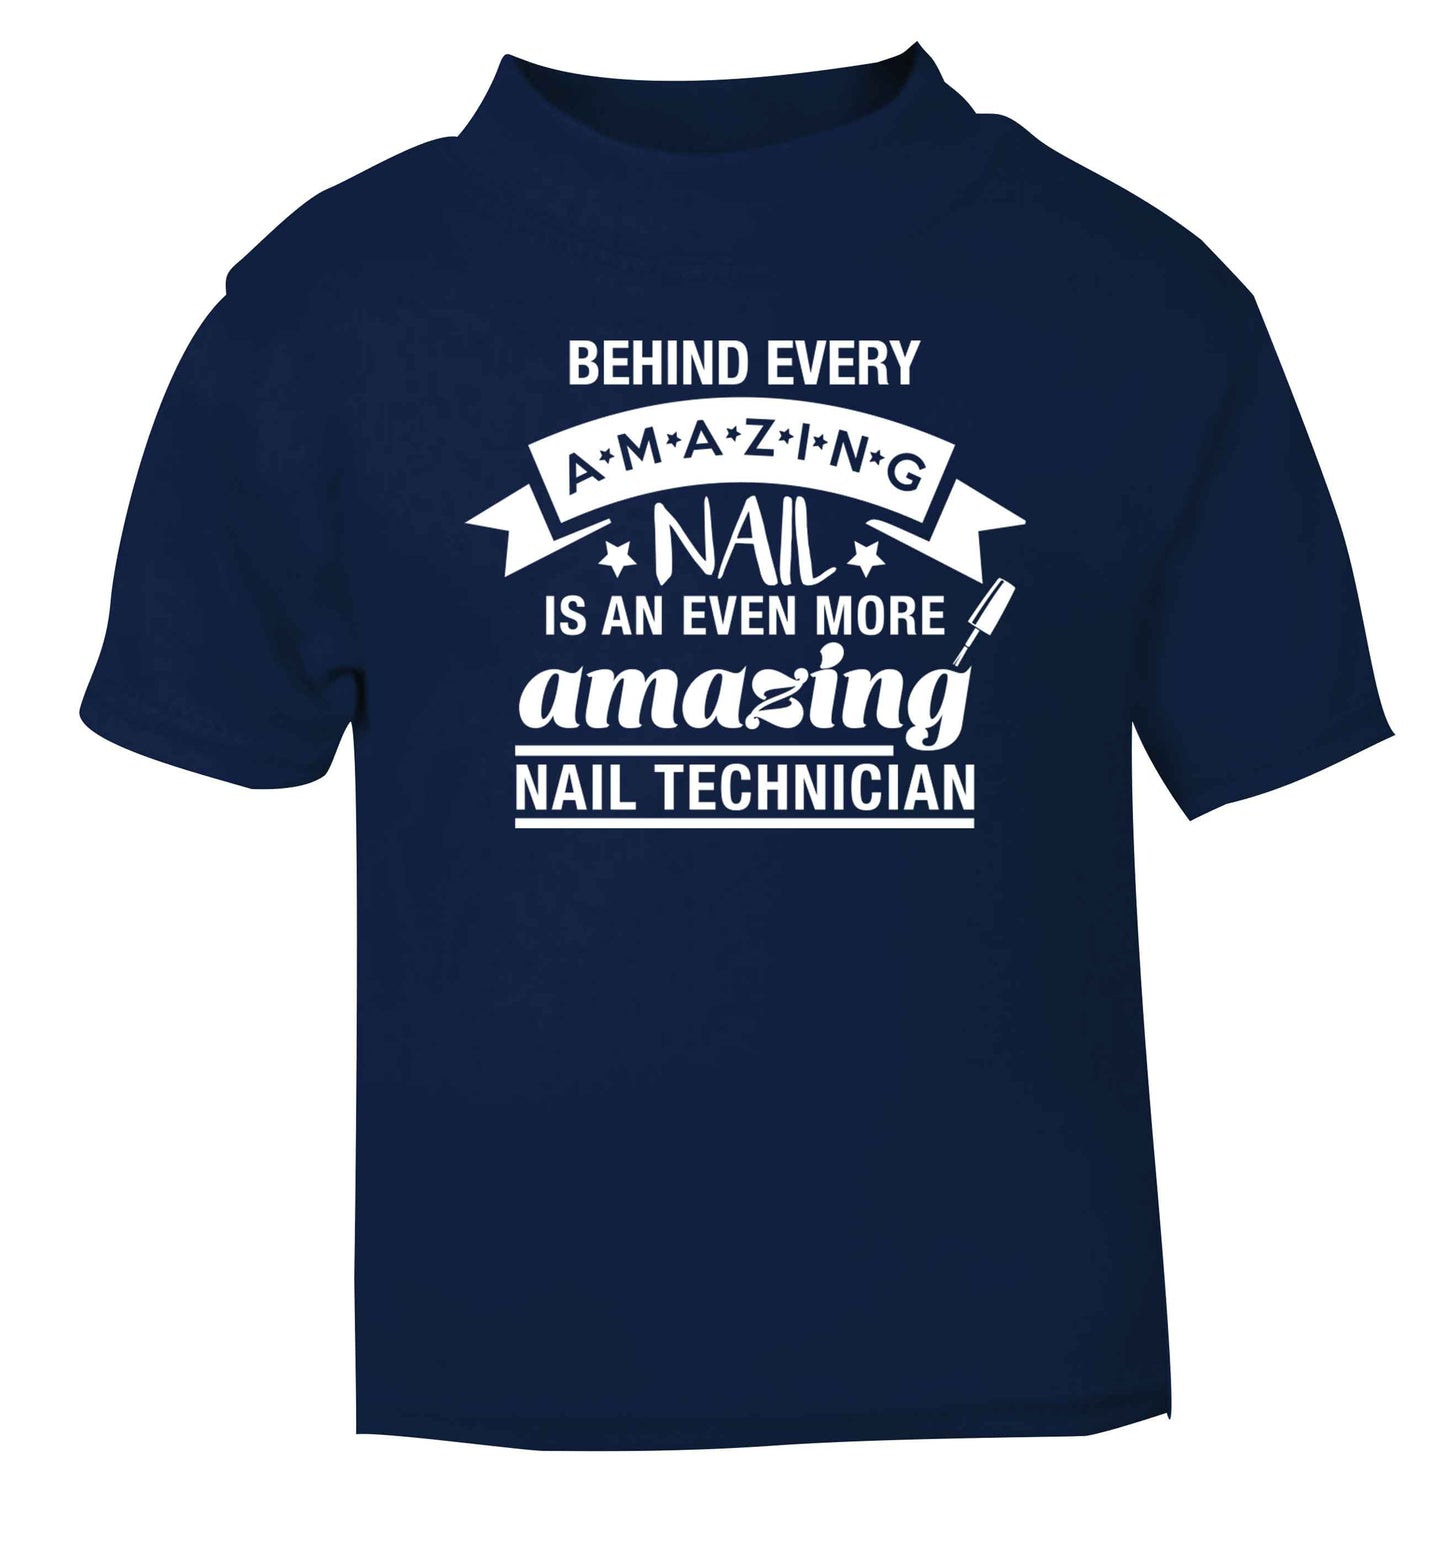 Behind every amazing nail is an even more amazing nail technician navy baby toddler Tshirt 2 Years